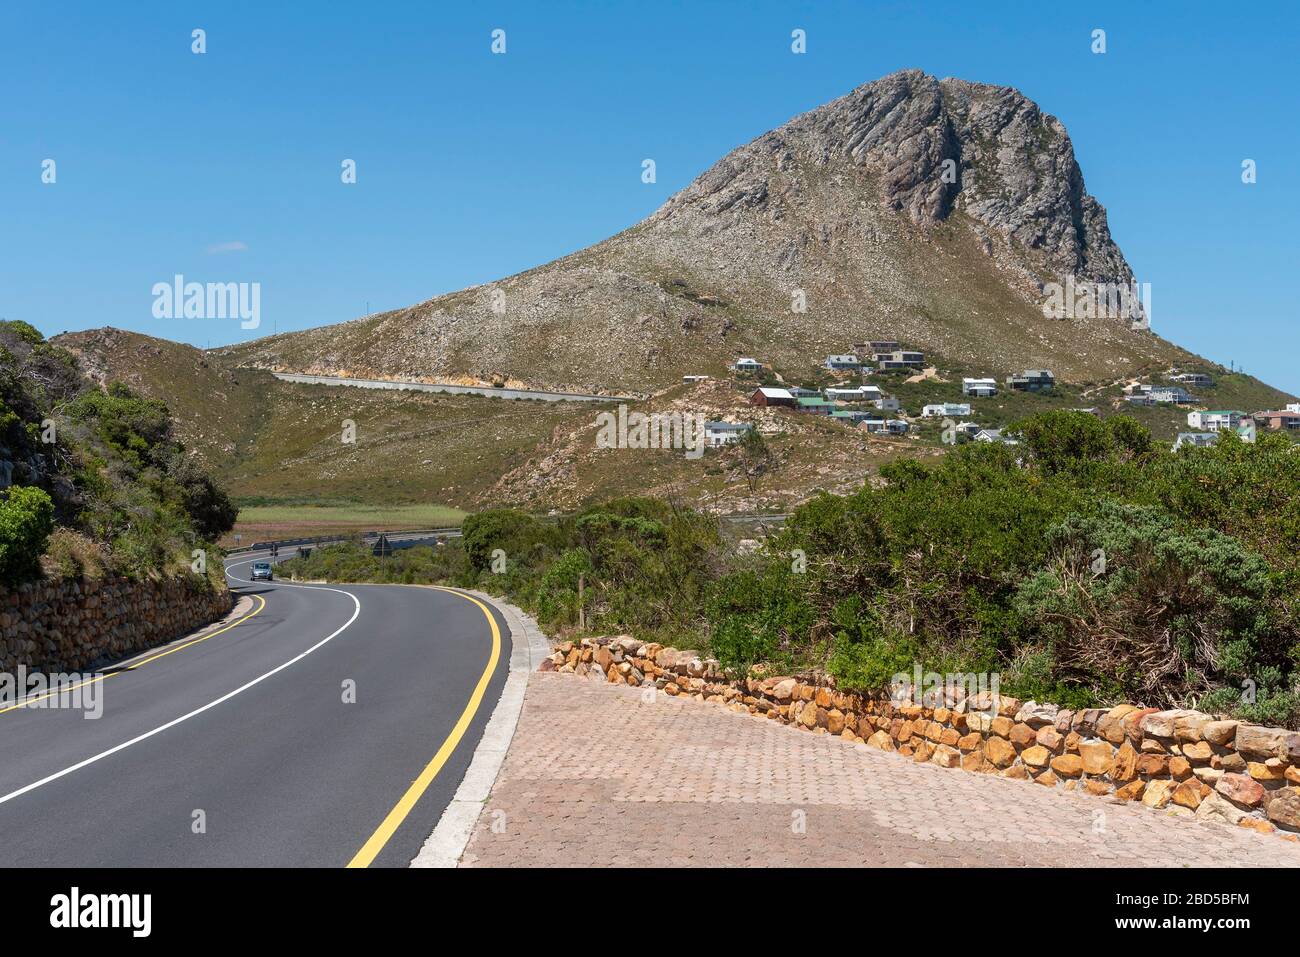 Rooiels Western Cape, South Africa. 2019. Rooi Els a small seaside development off Clarence Drive a scenic highway in the Overberg region. South Afric Stock Photo